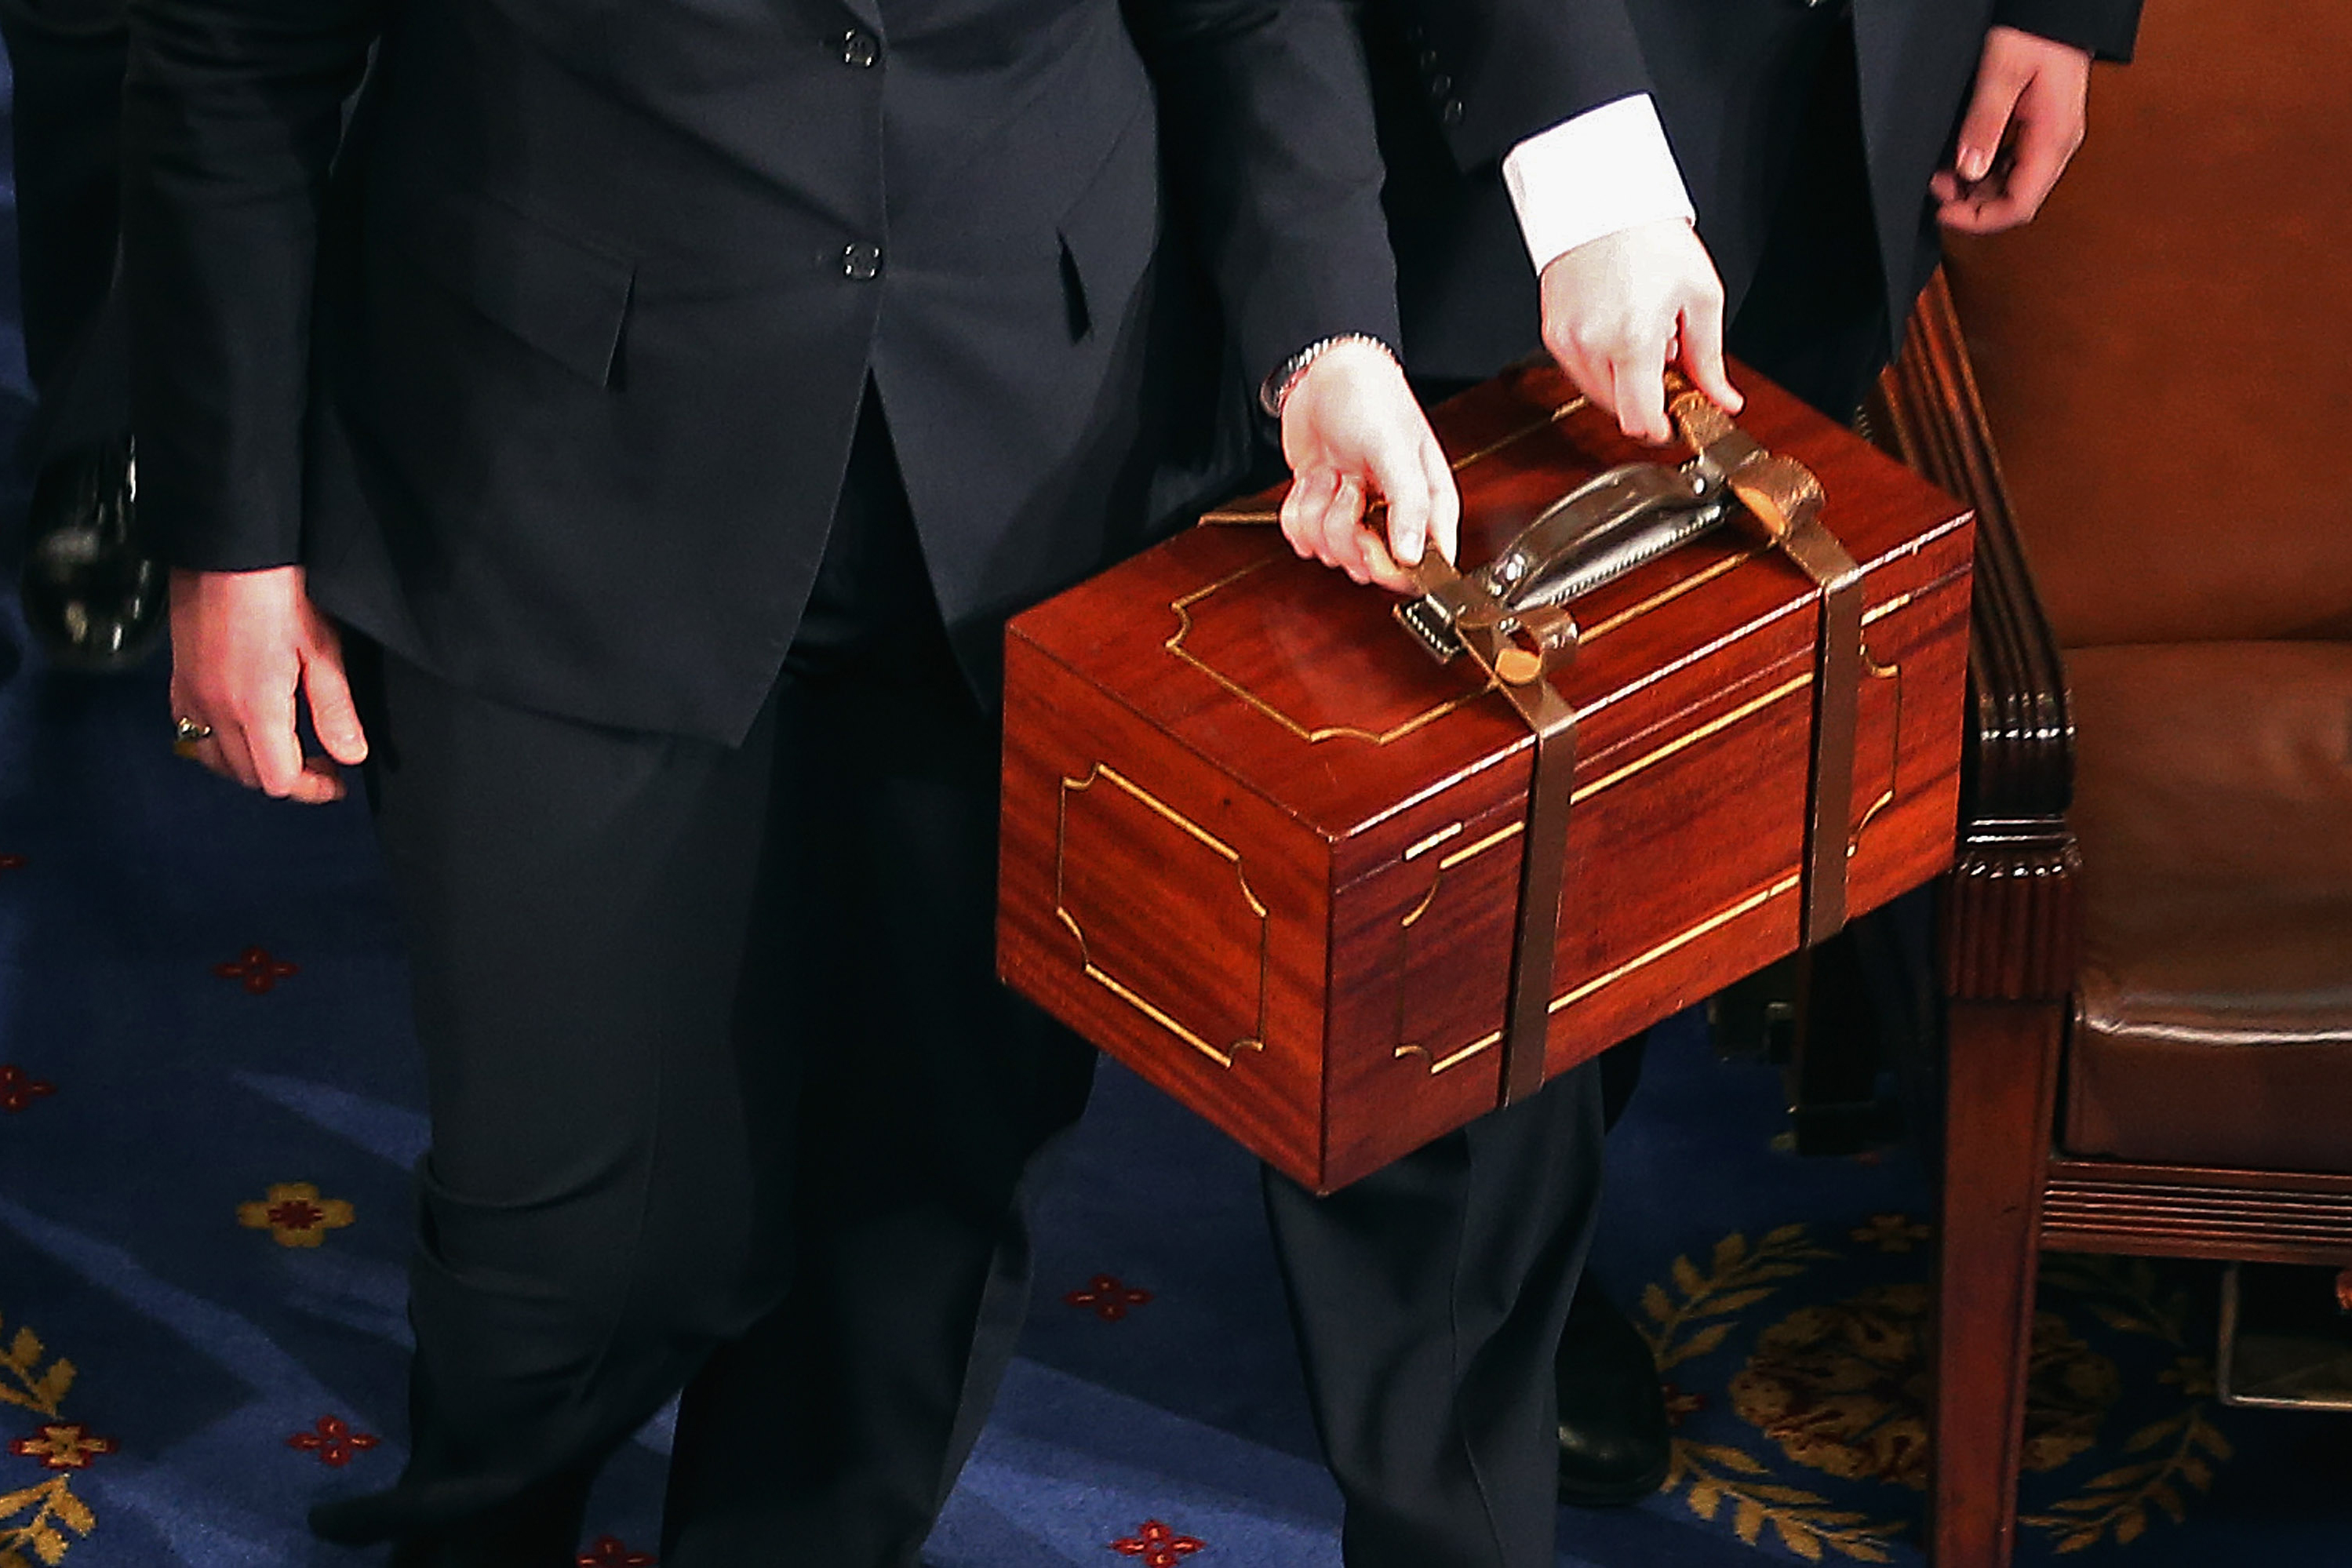 Senate pages carry bound wooden boxes containing the Electoral College votes from the 50 states into the House of Representatives chamber at the U.S. Capitol on Jan. 4, 2013 in Washington, D.C. (Photo by Chip Somodevilla/Getty Images)